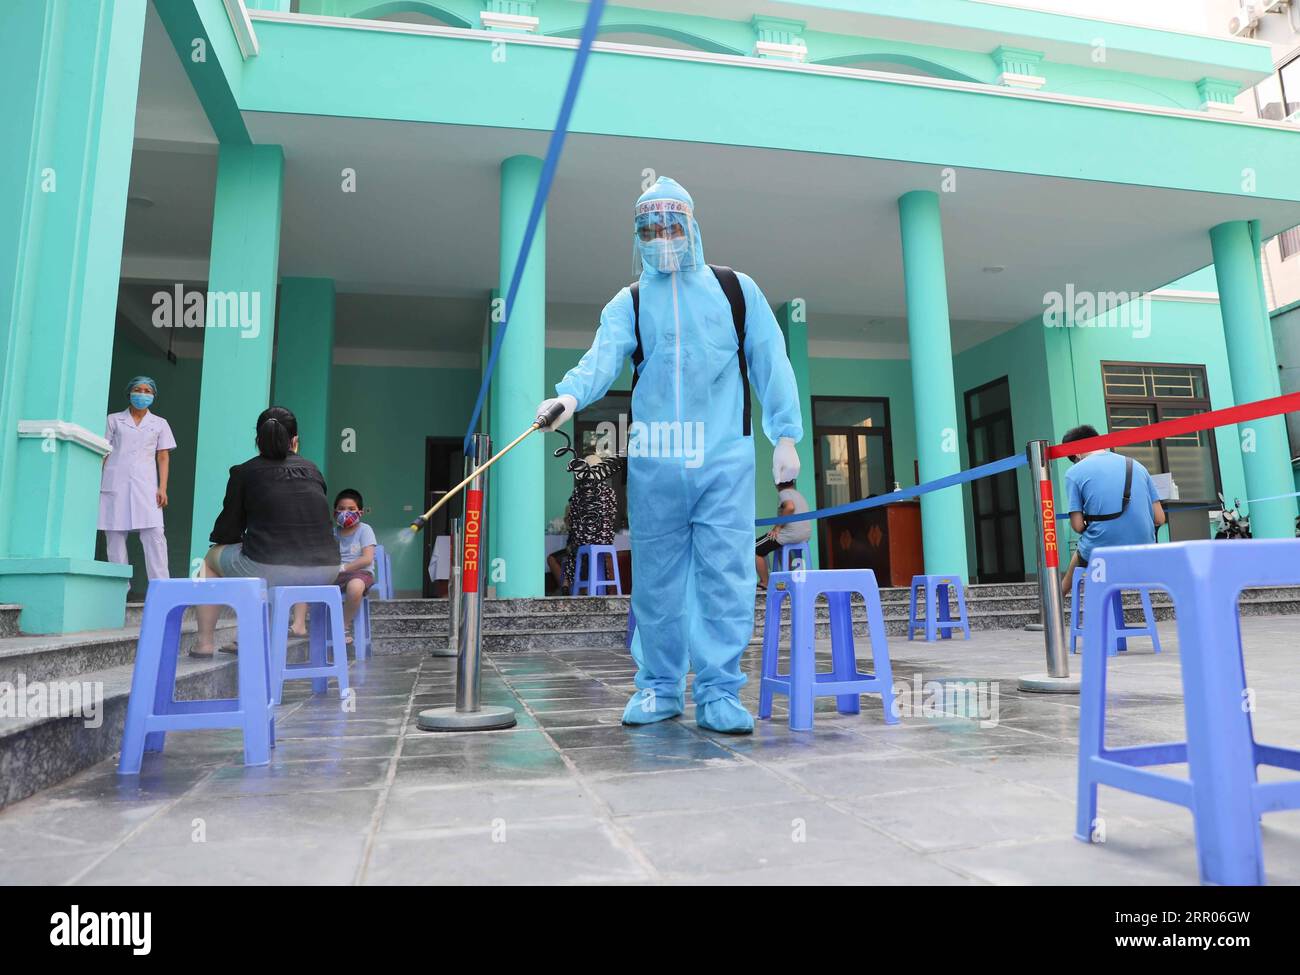 200731 -- HANOI, July 31, 2020 Xinhua -- A staff member disinfects at a health station in Hanoi, Vietnam, July 30, 2020. Vietnam recorded 45 new domestically transmitted COVID-19 cases on Friday morning, bringing its total confirmed cases to 509, according to its Ministry of Health. VNA/Handout via Xinhua VIETNAM-COVID-19-CASES PUBLICATIONxNOTxINxCHN Stock Photo